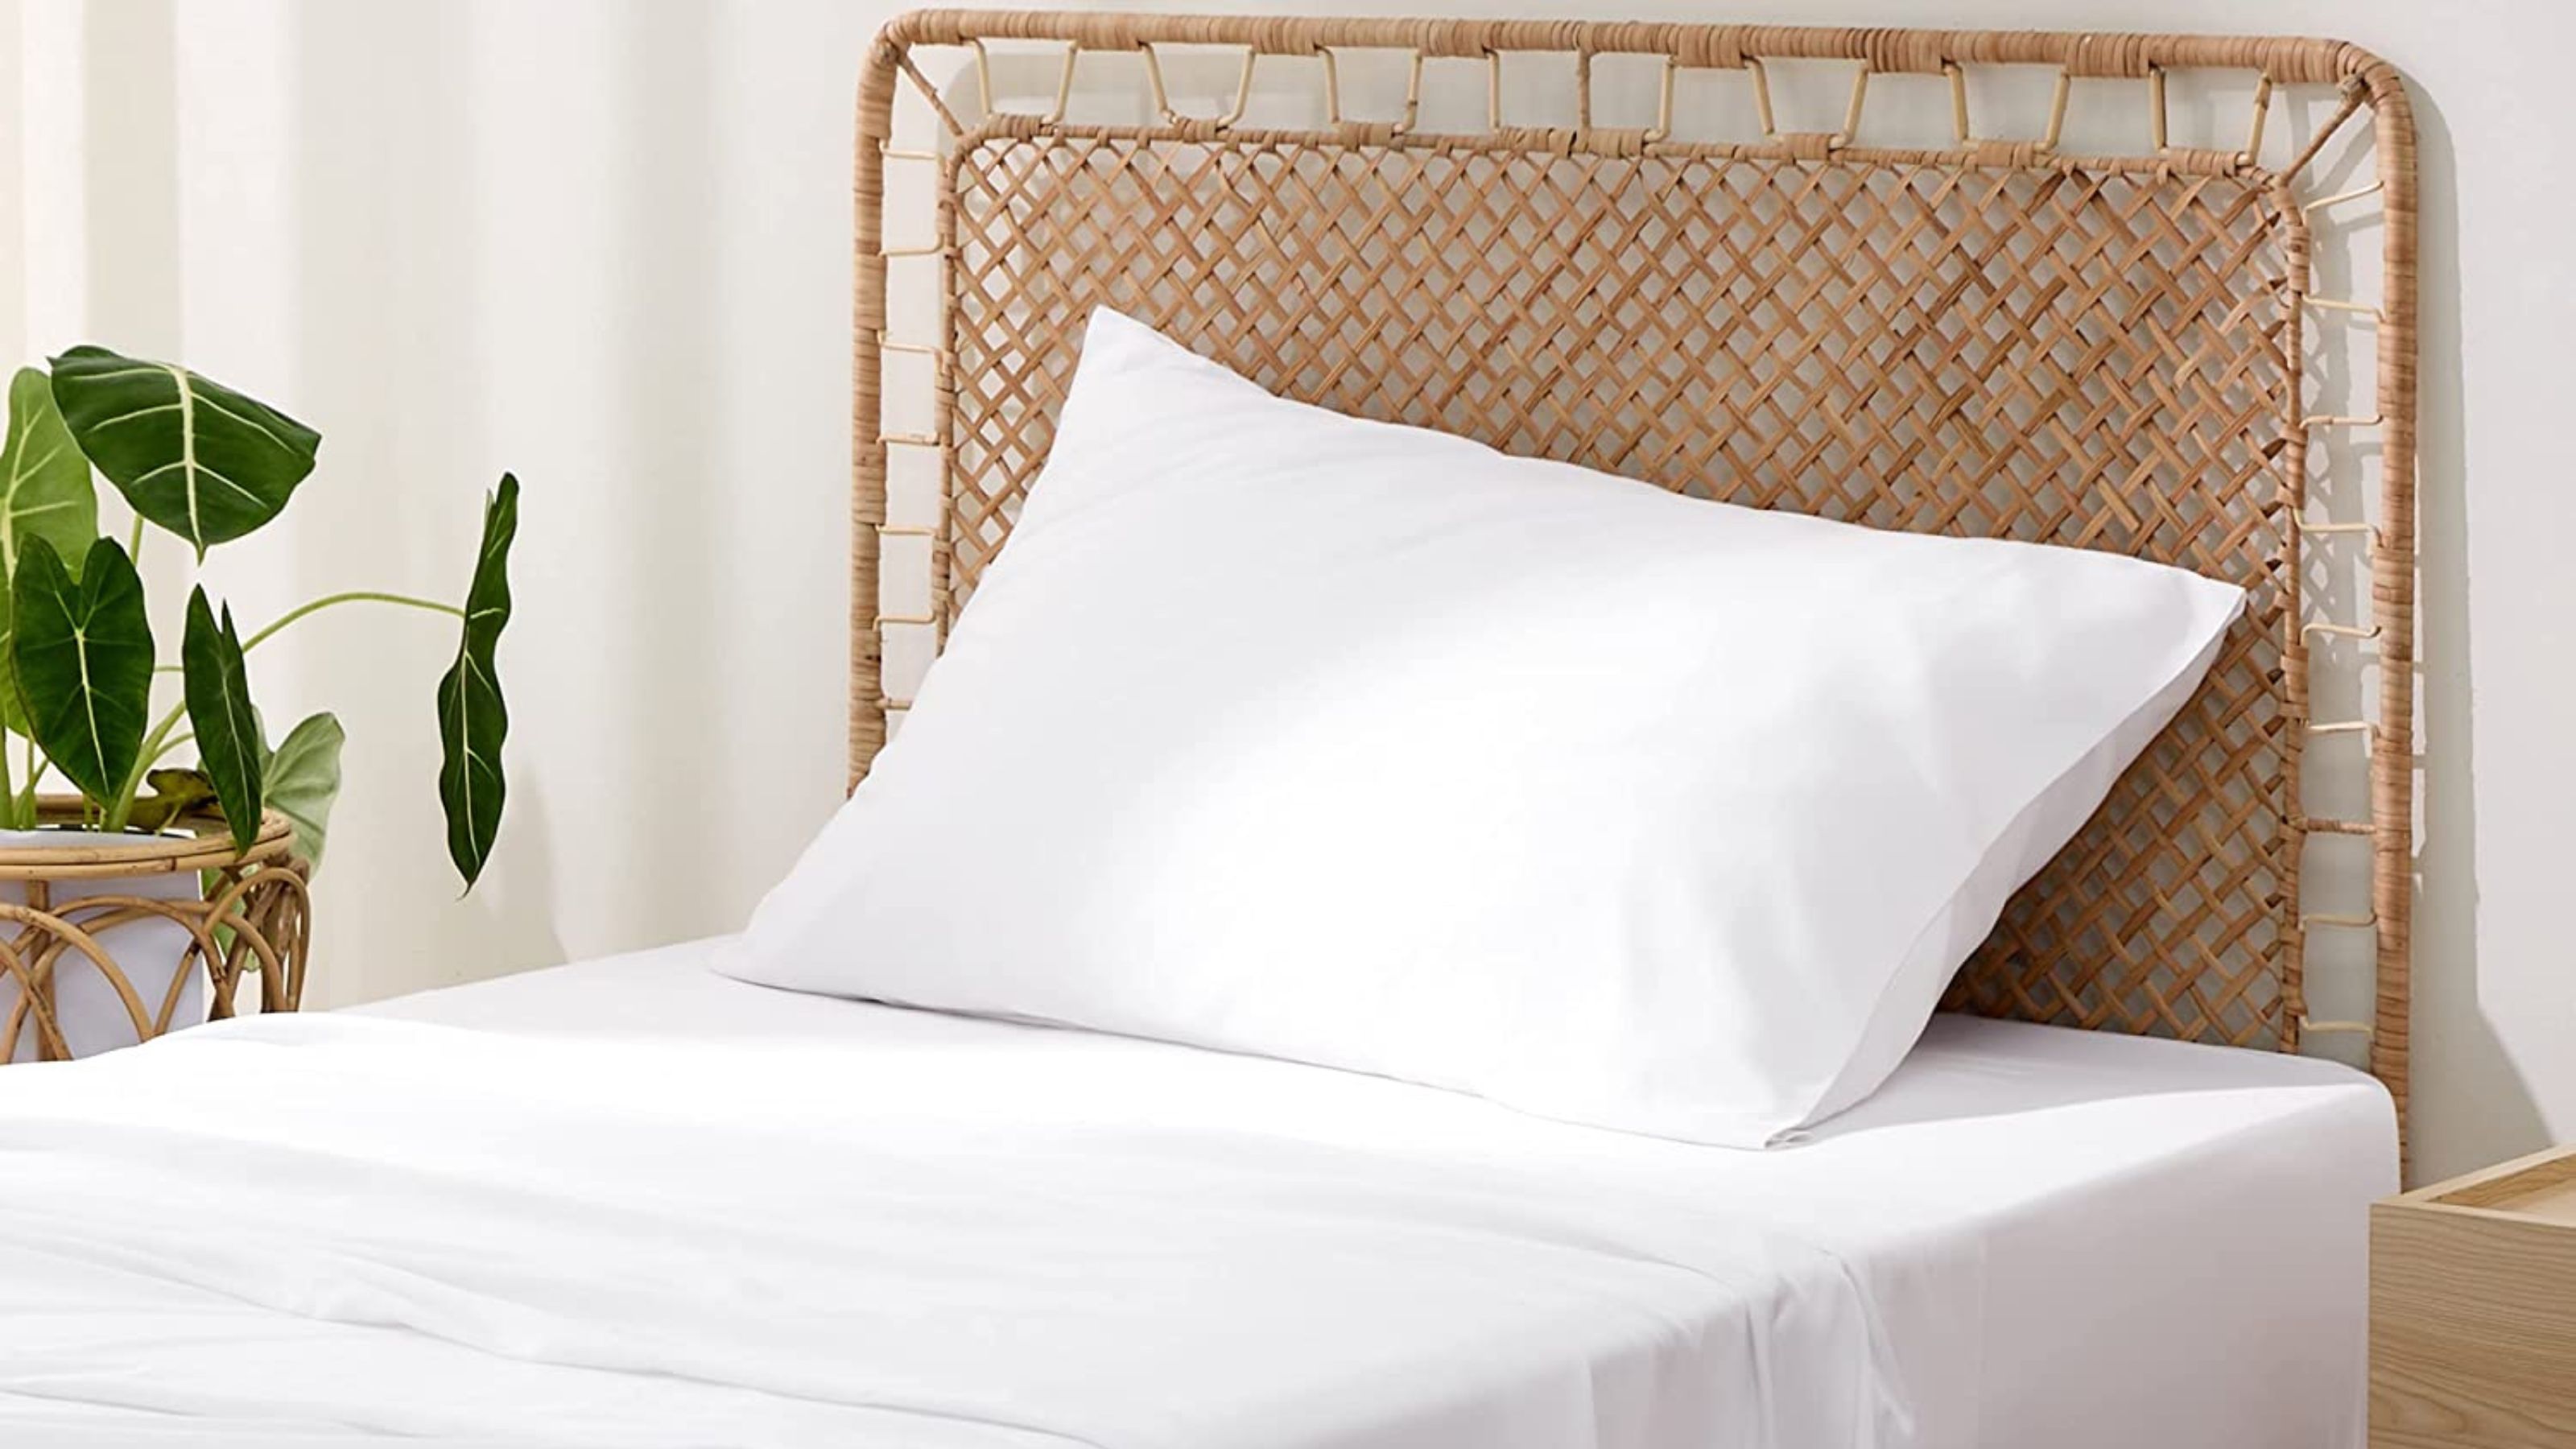 Why Editors Love the Bedsure Comforter Set: Tried & Tested